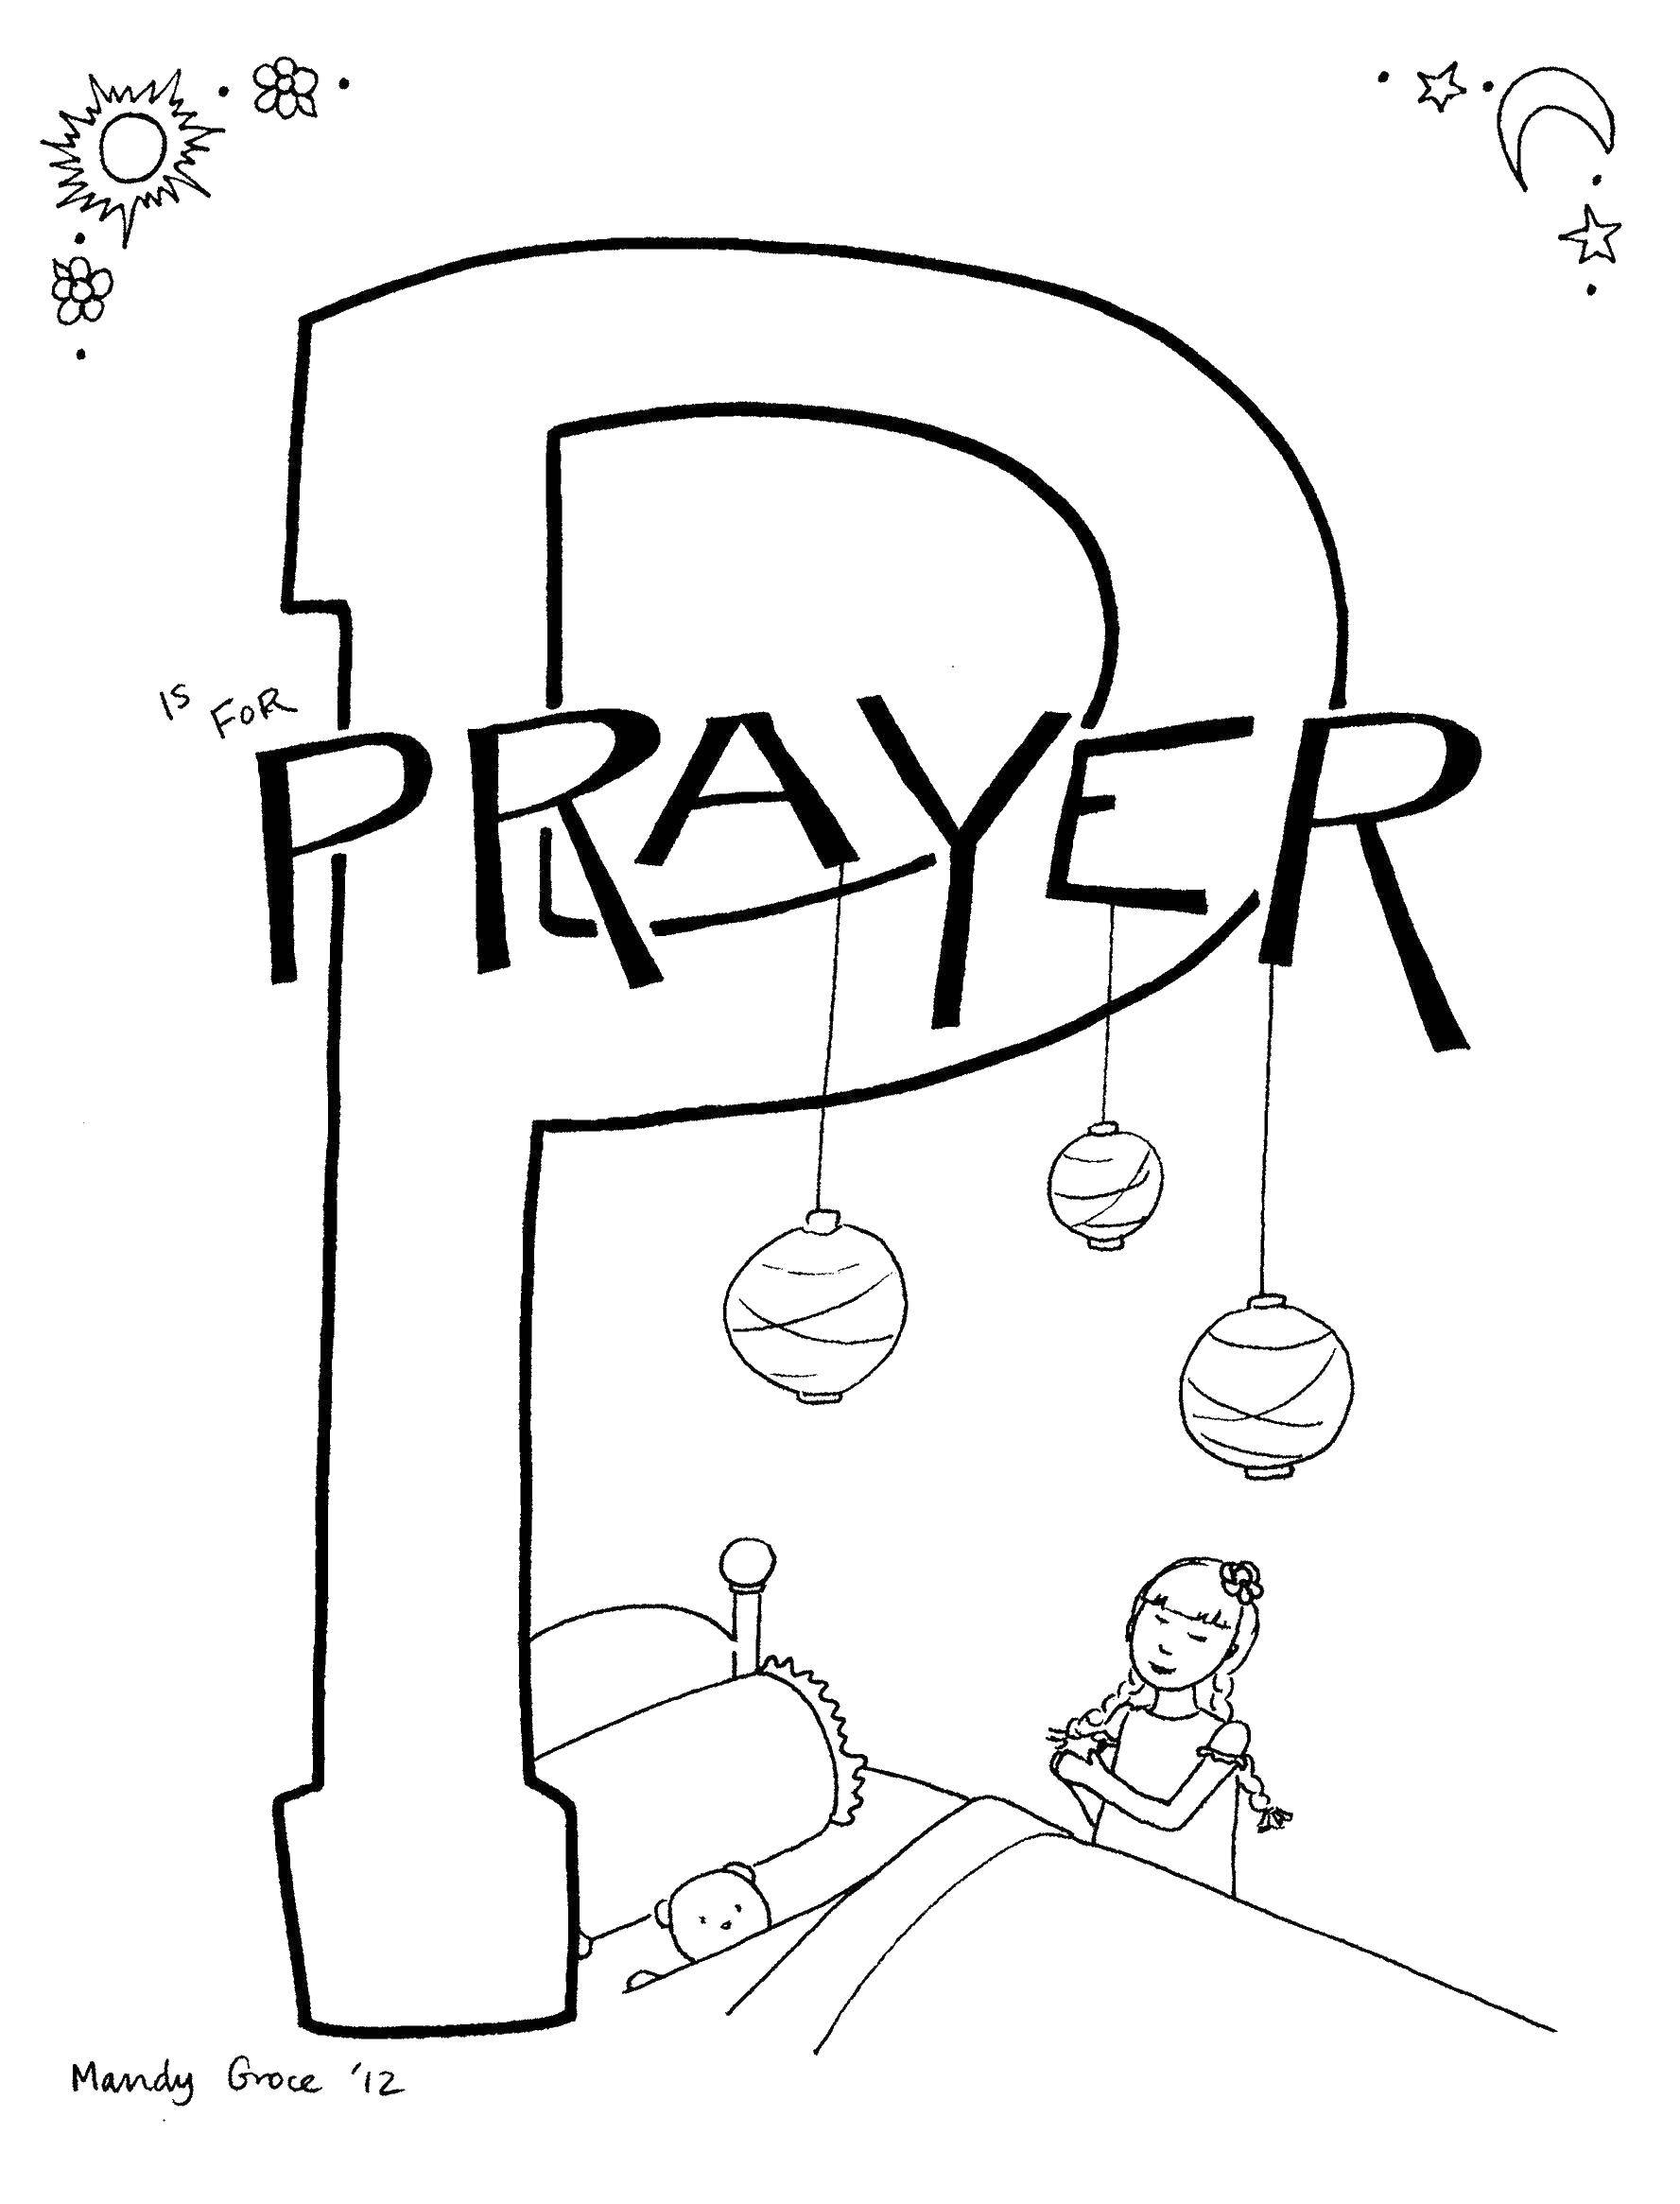 Coloring The girl prays before bedtime. Category the Bible. Tags:  the Bible, Jesus, children, prayer.